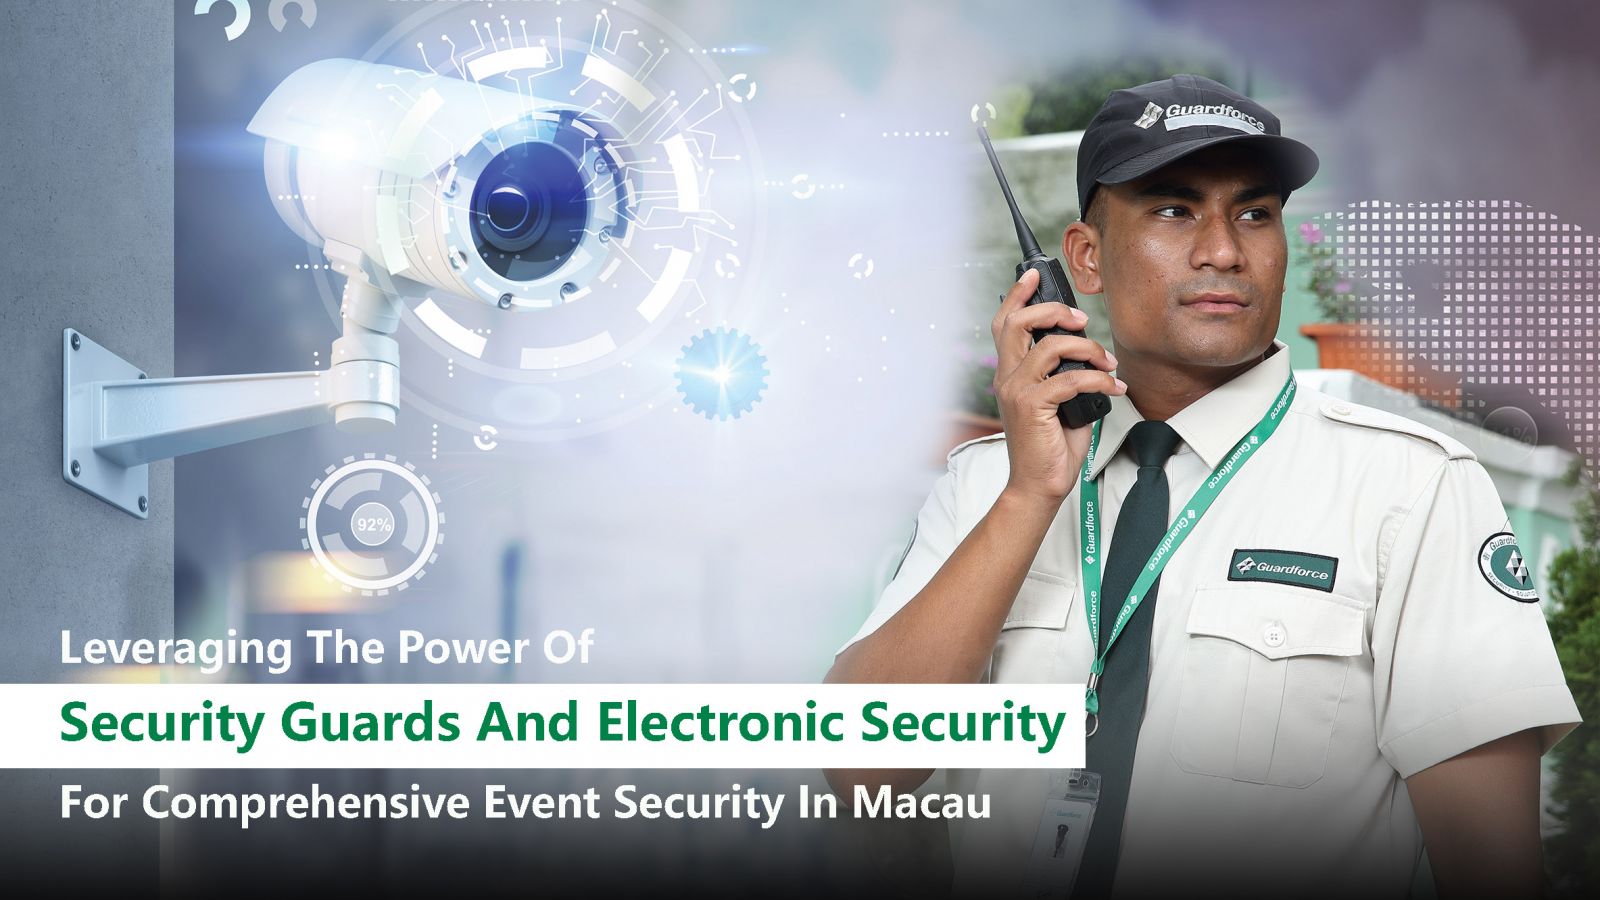 Leveraging The Power Of Security Guards And Electronic Security For Comprehensive Event Security In Macau | Guardforce Macau Blog 202401